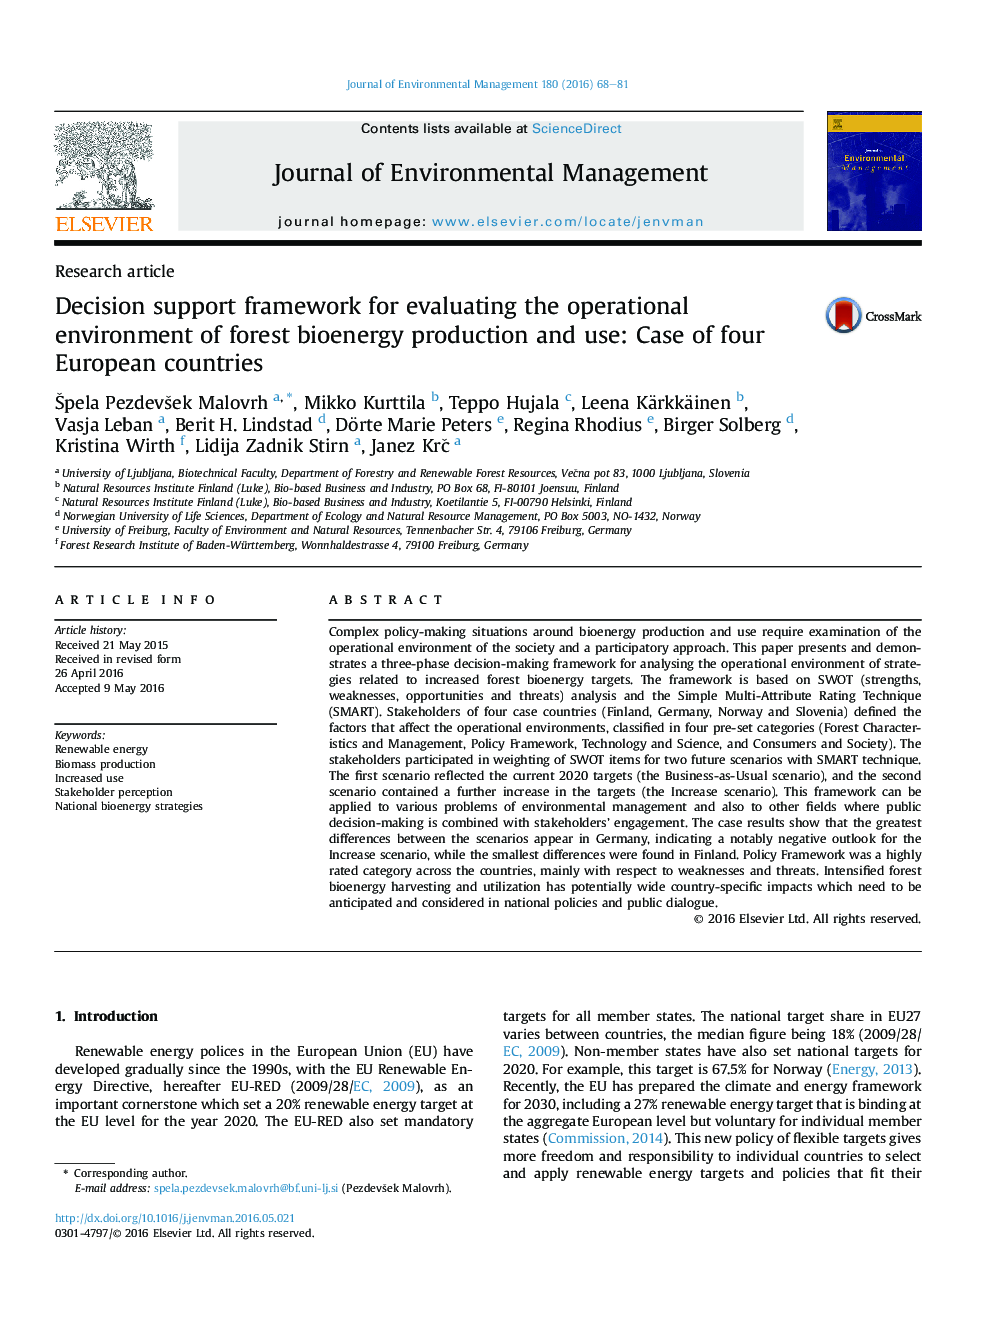 Decision support framework for evaluating the operational environment of forest bioenergy production and use: Case of four European countries